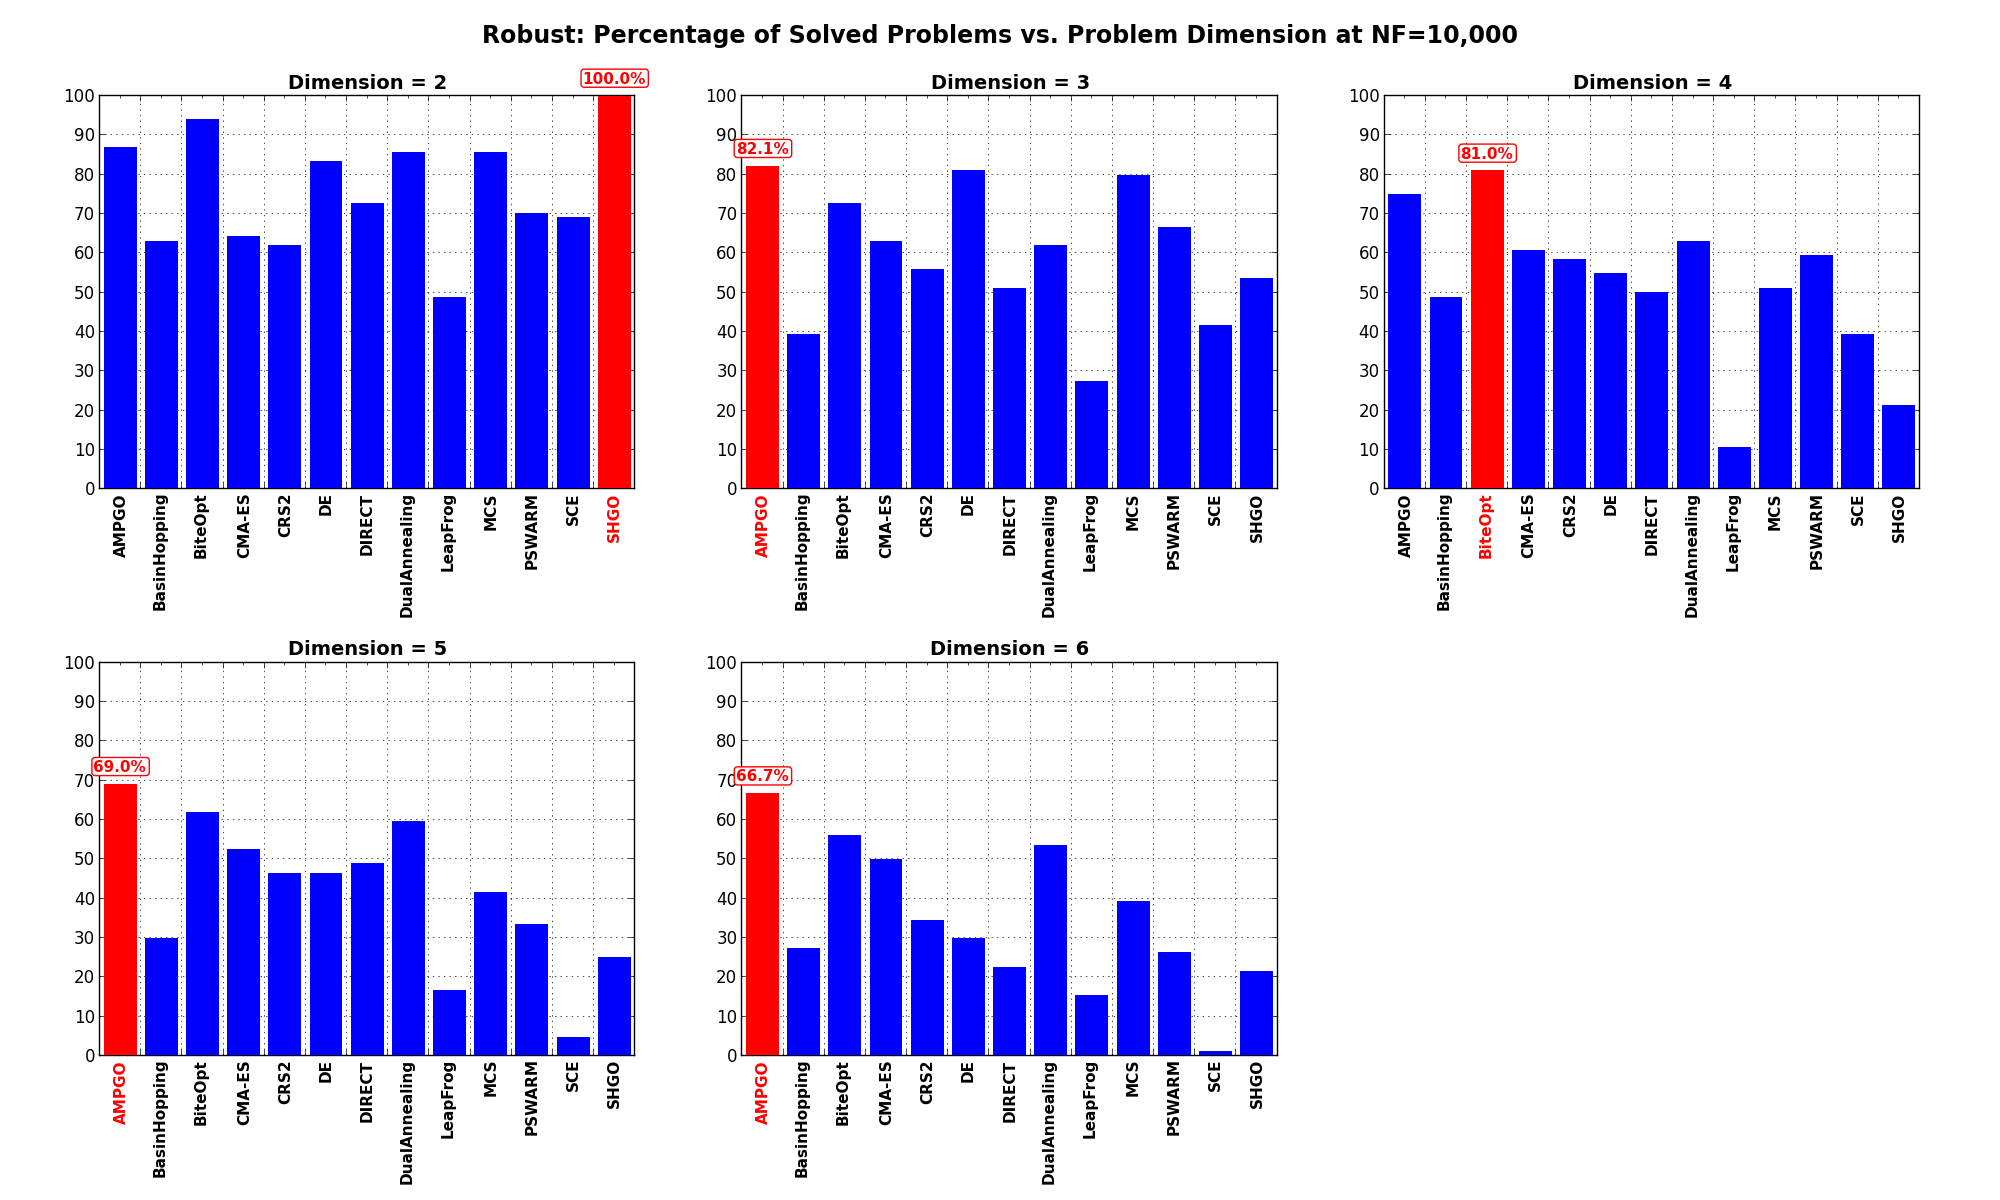 Percentage of problems solved as a function of problem dimension at :math:`NF = 10,000`